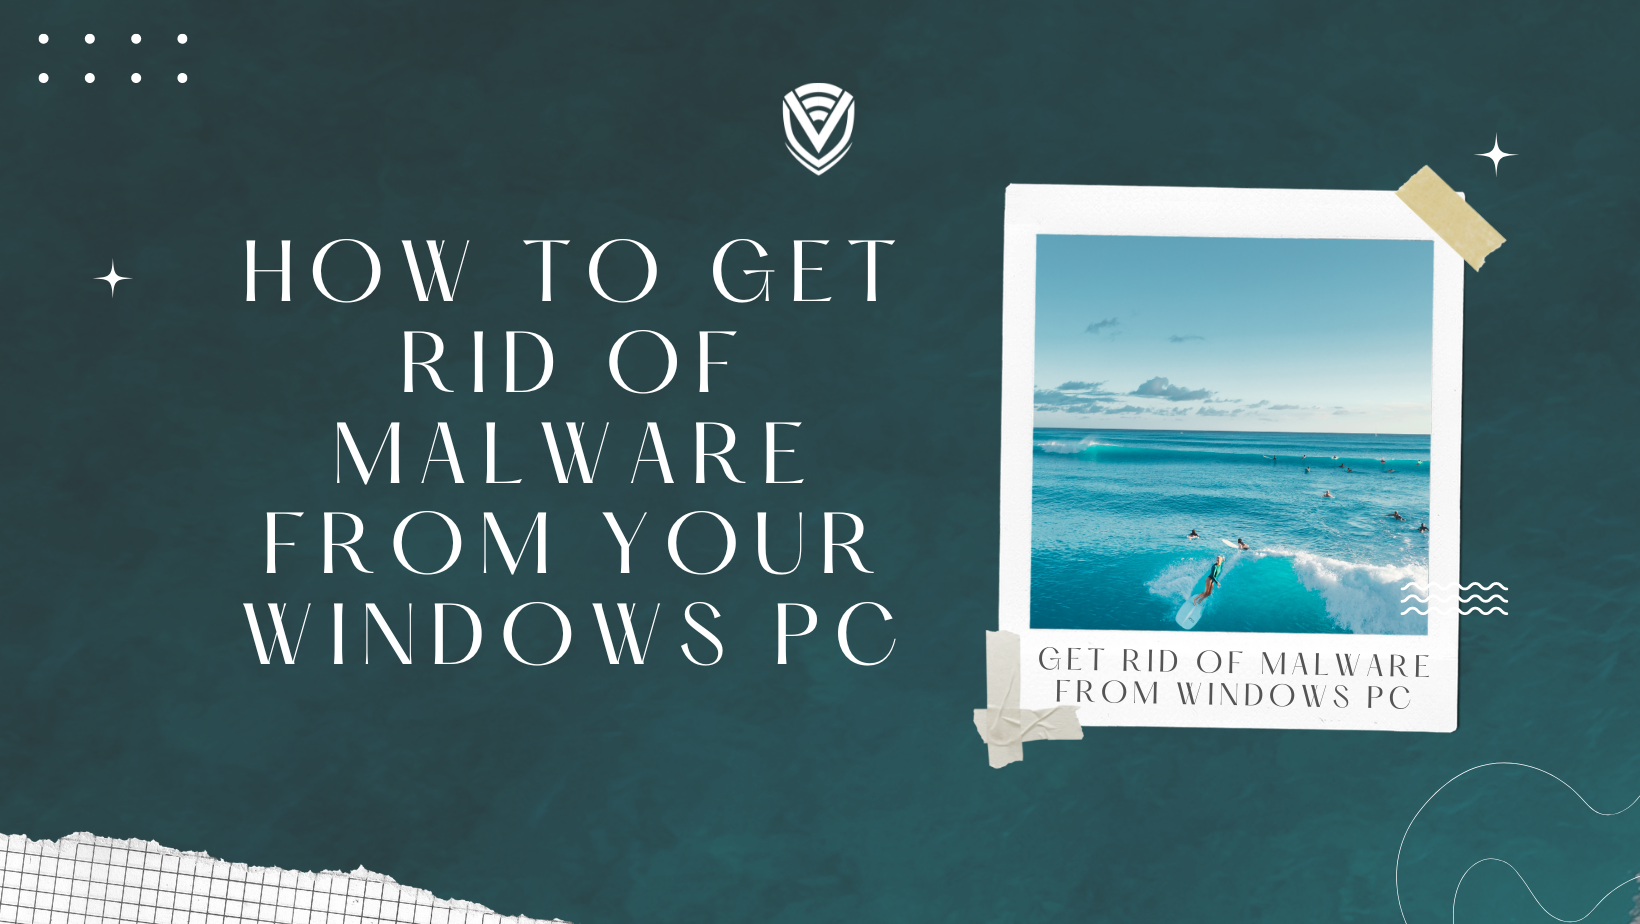 How to Get Rid of Malware from your Windows PC